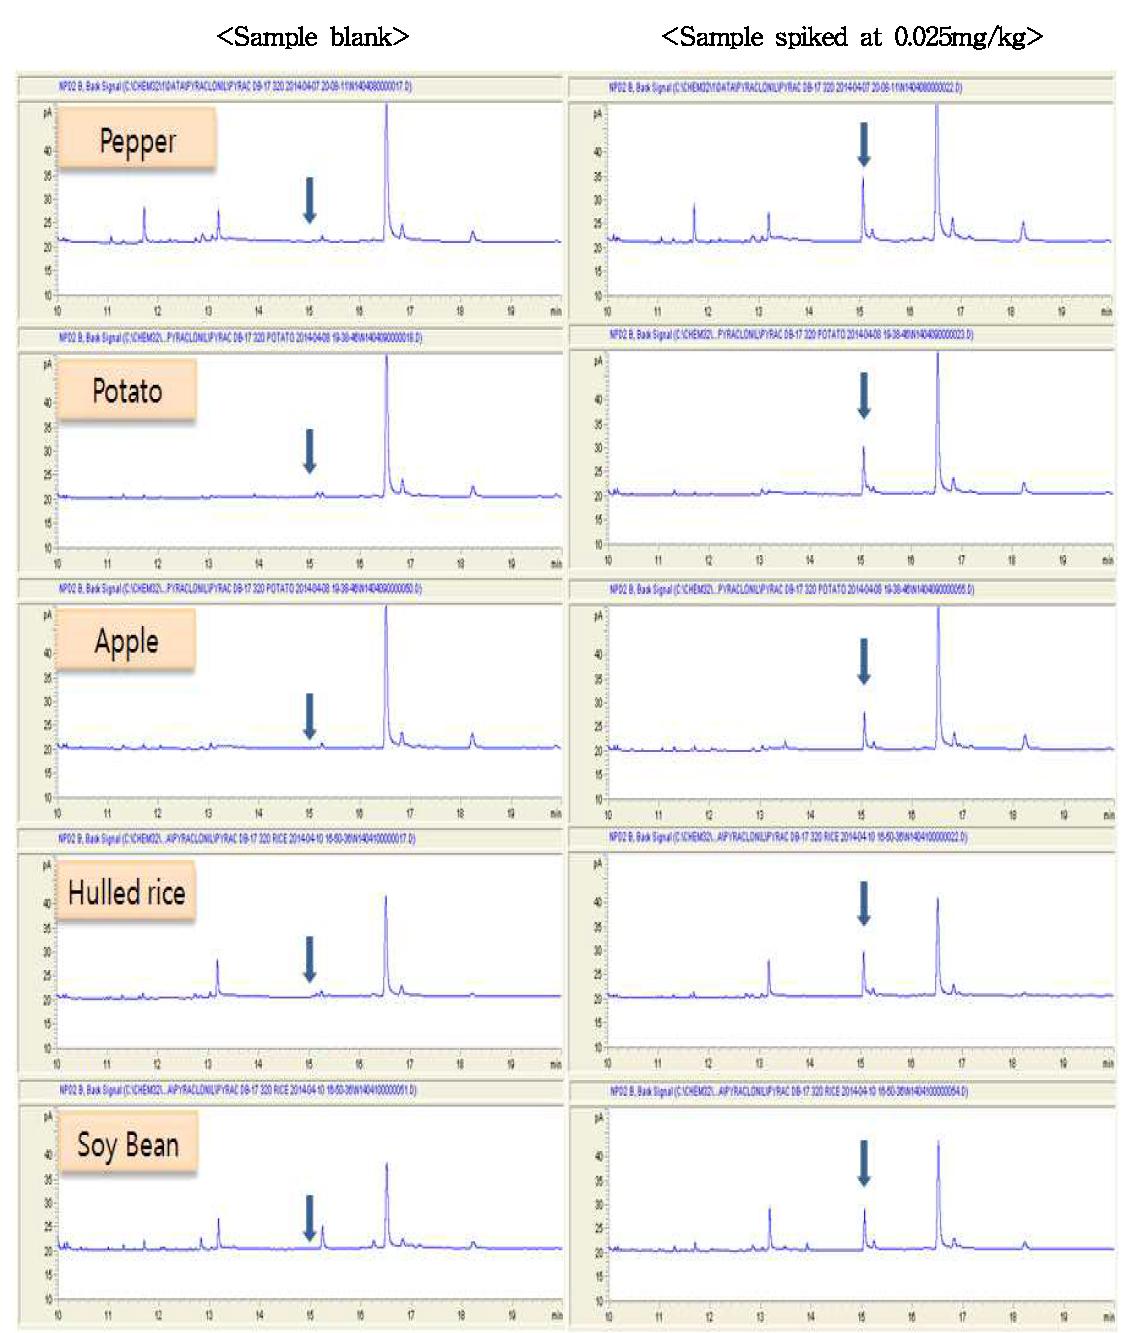 Chromatogram of sample extracts obtained by sample preparation and GC/NPD analysis at 0.025mg/kg spiking level